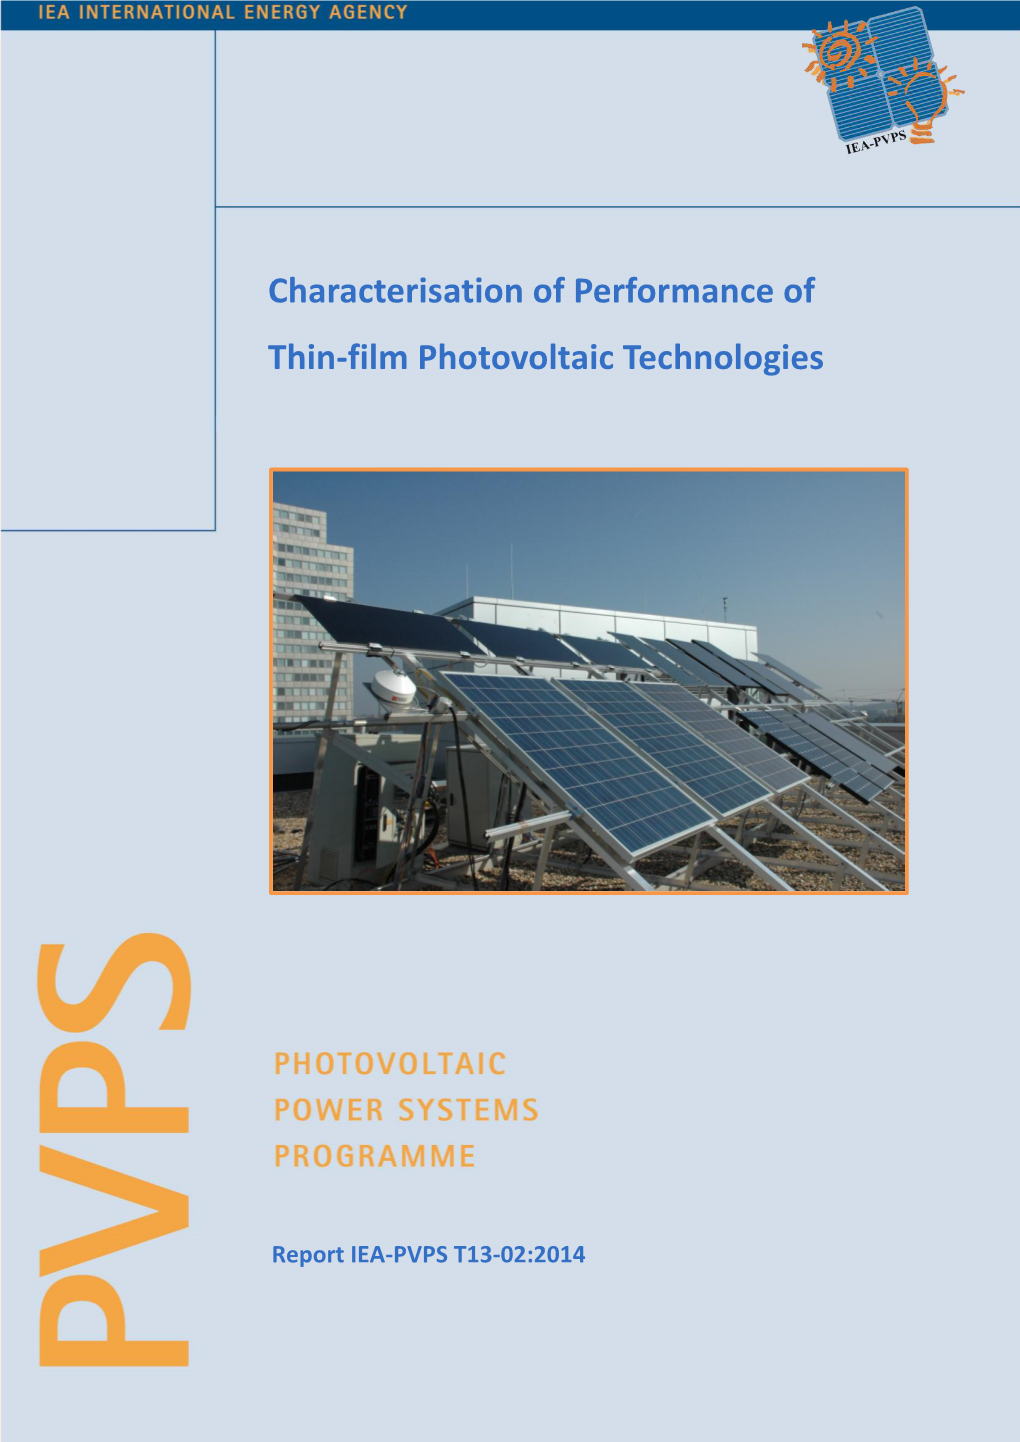 Characterization of Performance of Thin-Film PV Technologies.Docx